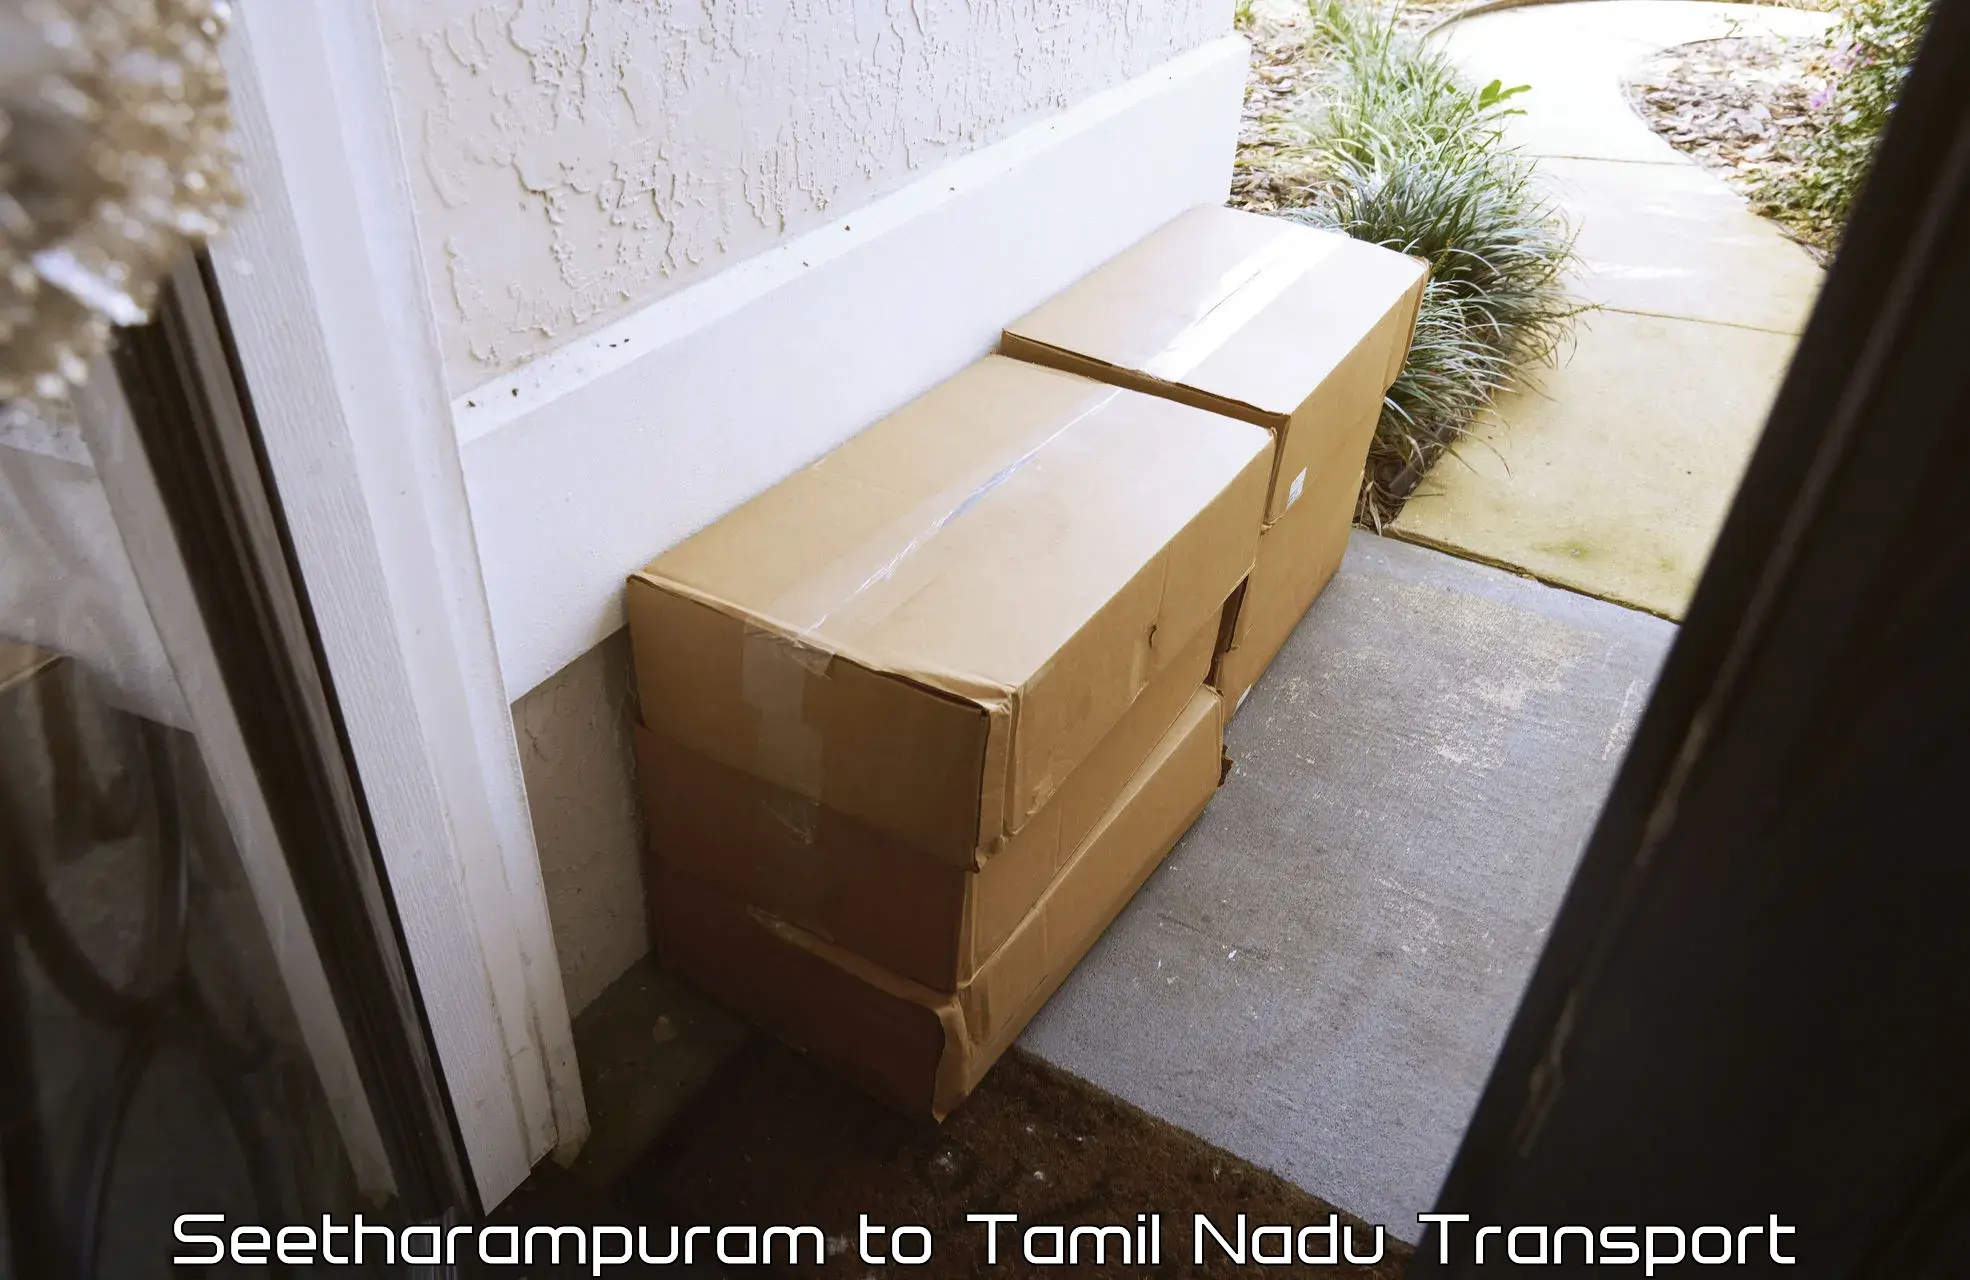 Transport bike from one state to another Seetharampuram to Tamil Nadu